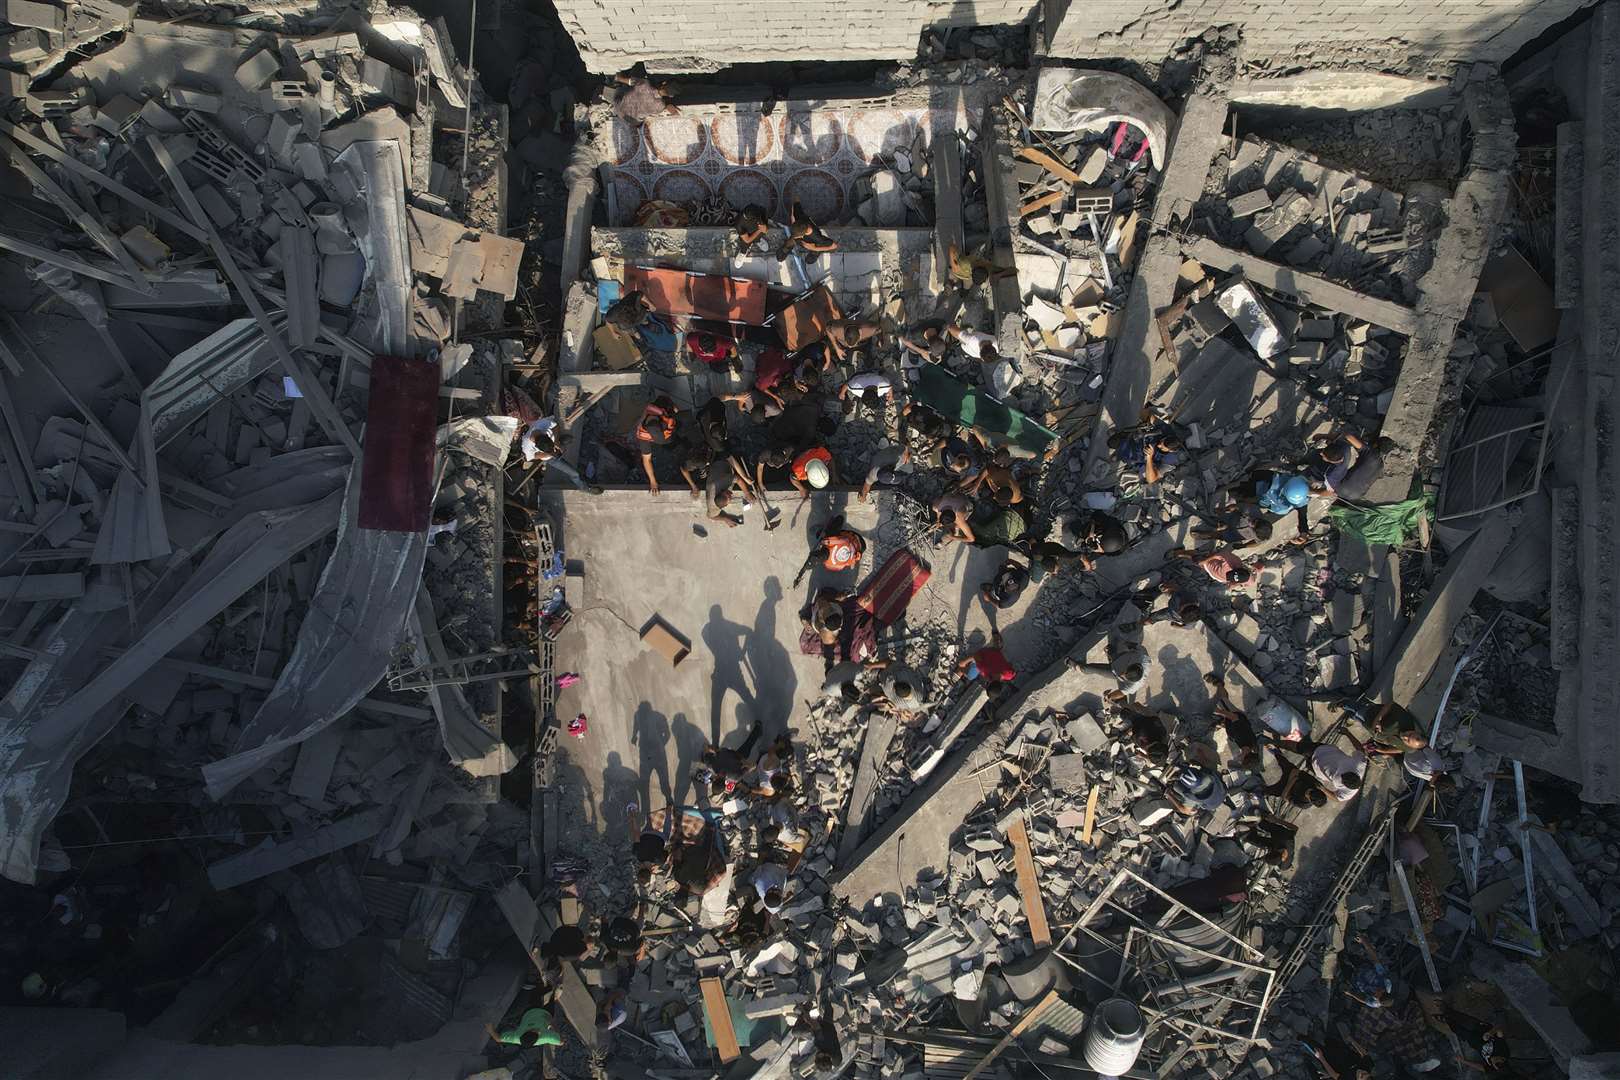 Palestinians inspect the rubble of buildings hit by an Israeli airstrike at Al Shati Refugee Camp (AP Photo/Hatem Moussa)